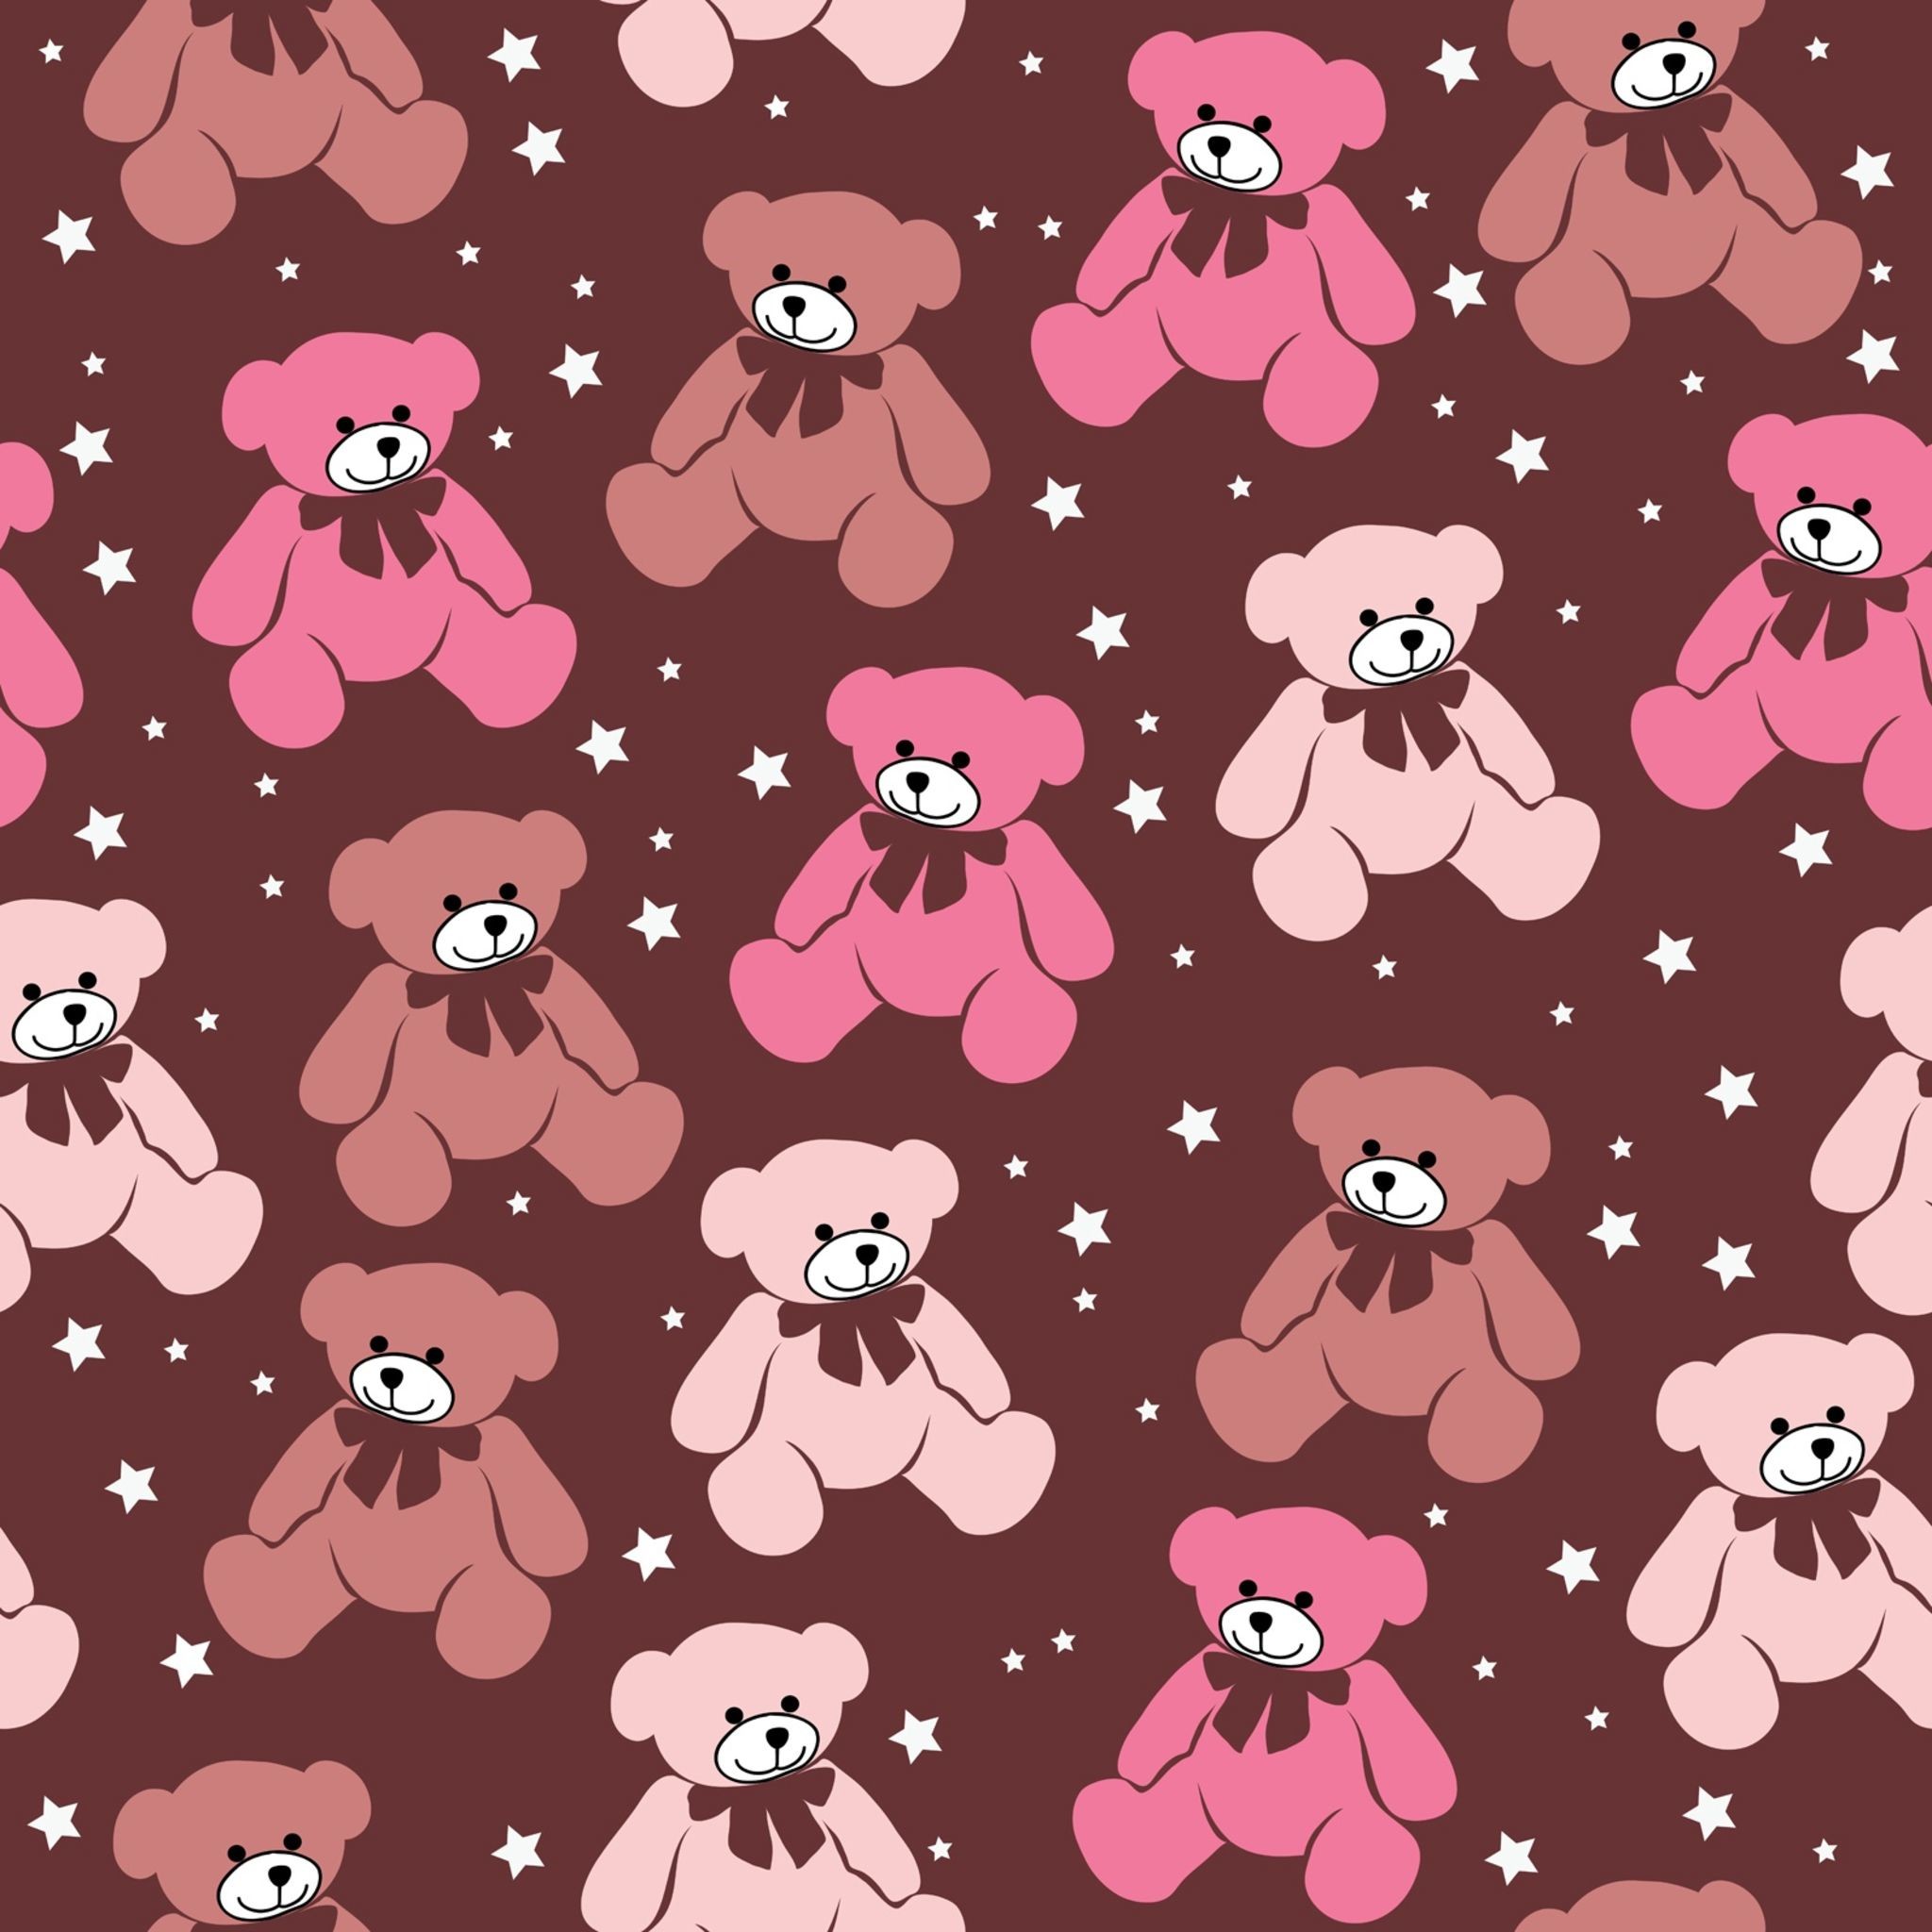 Teddy Bear Wallpaper For Android - HD Wallpaper 